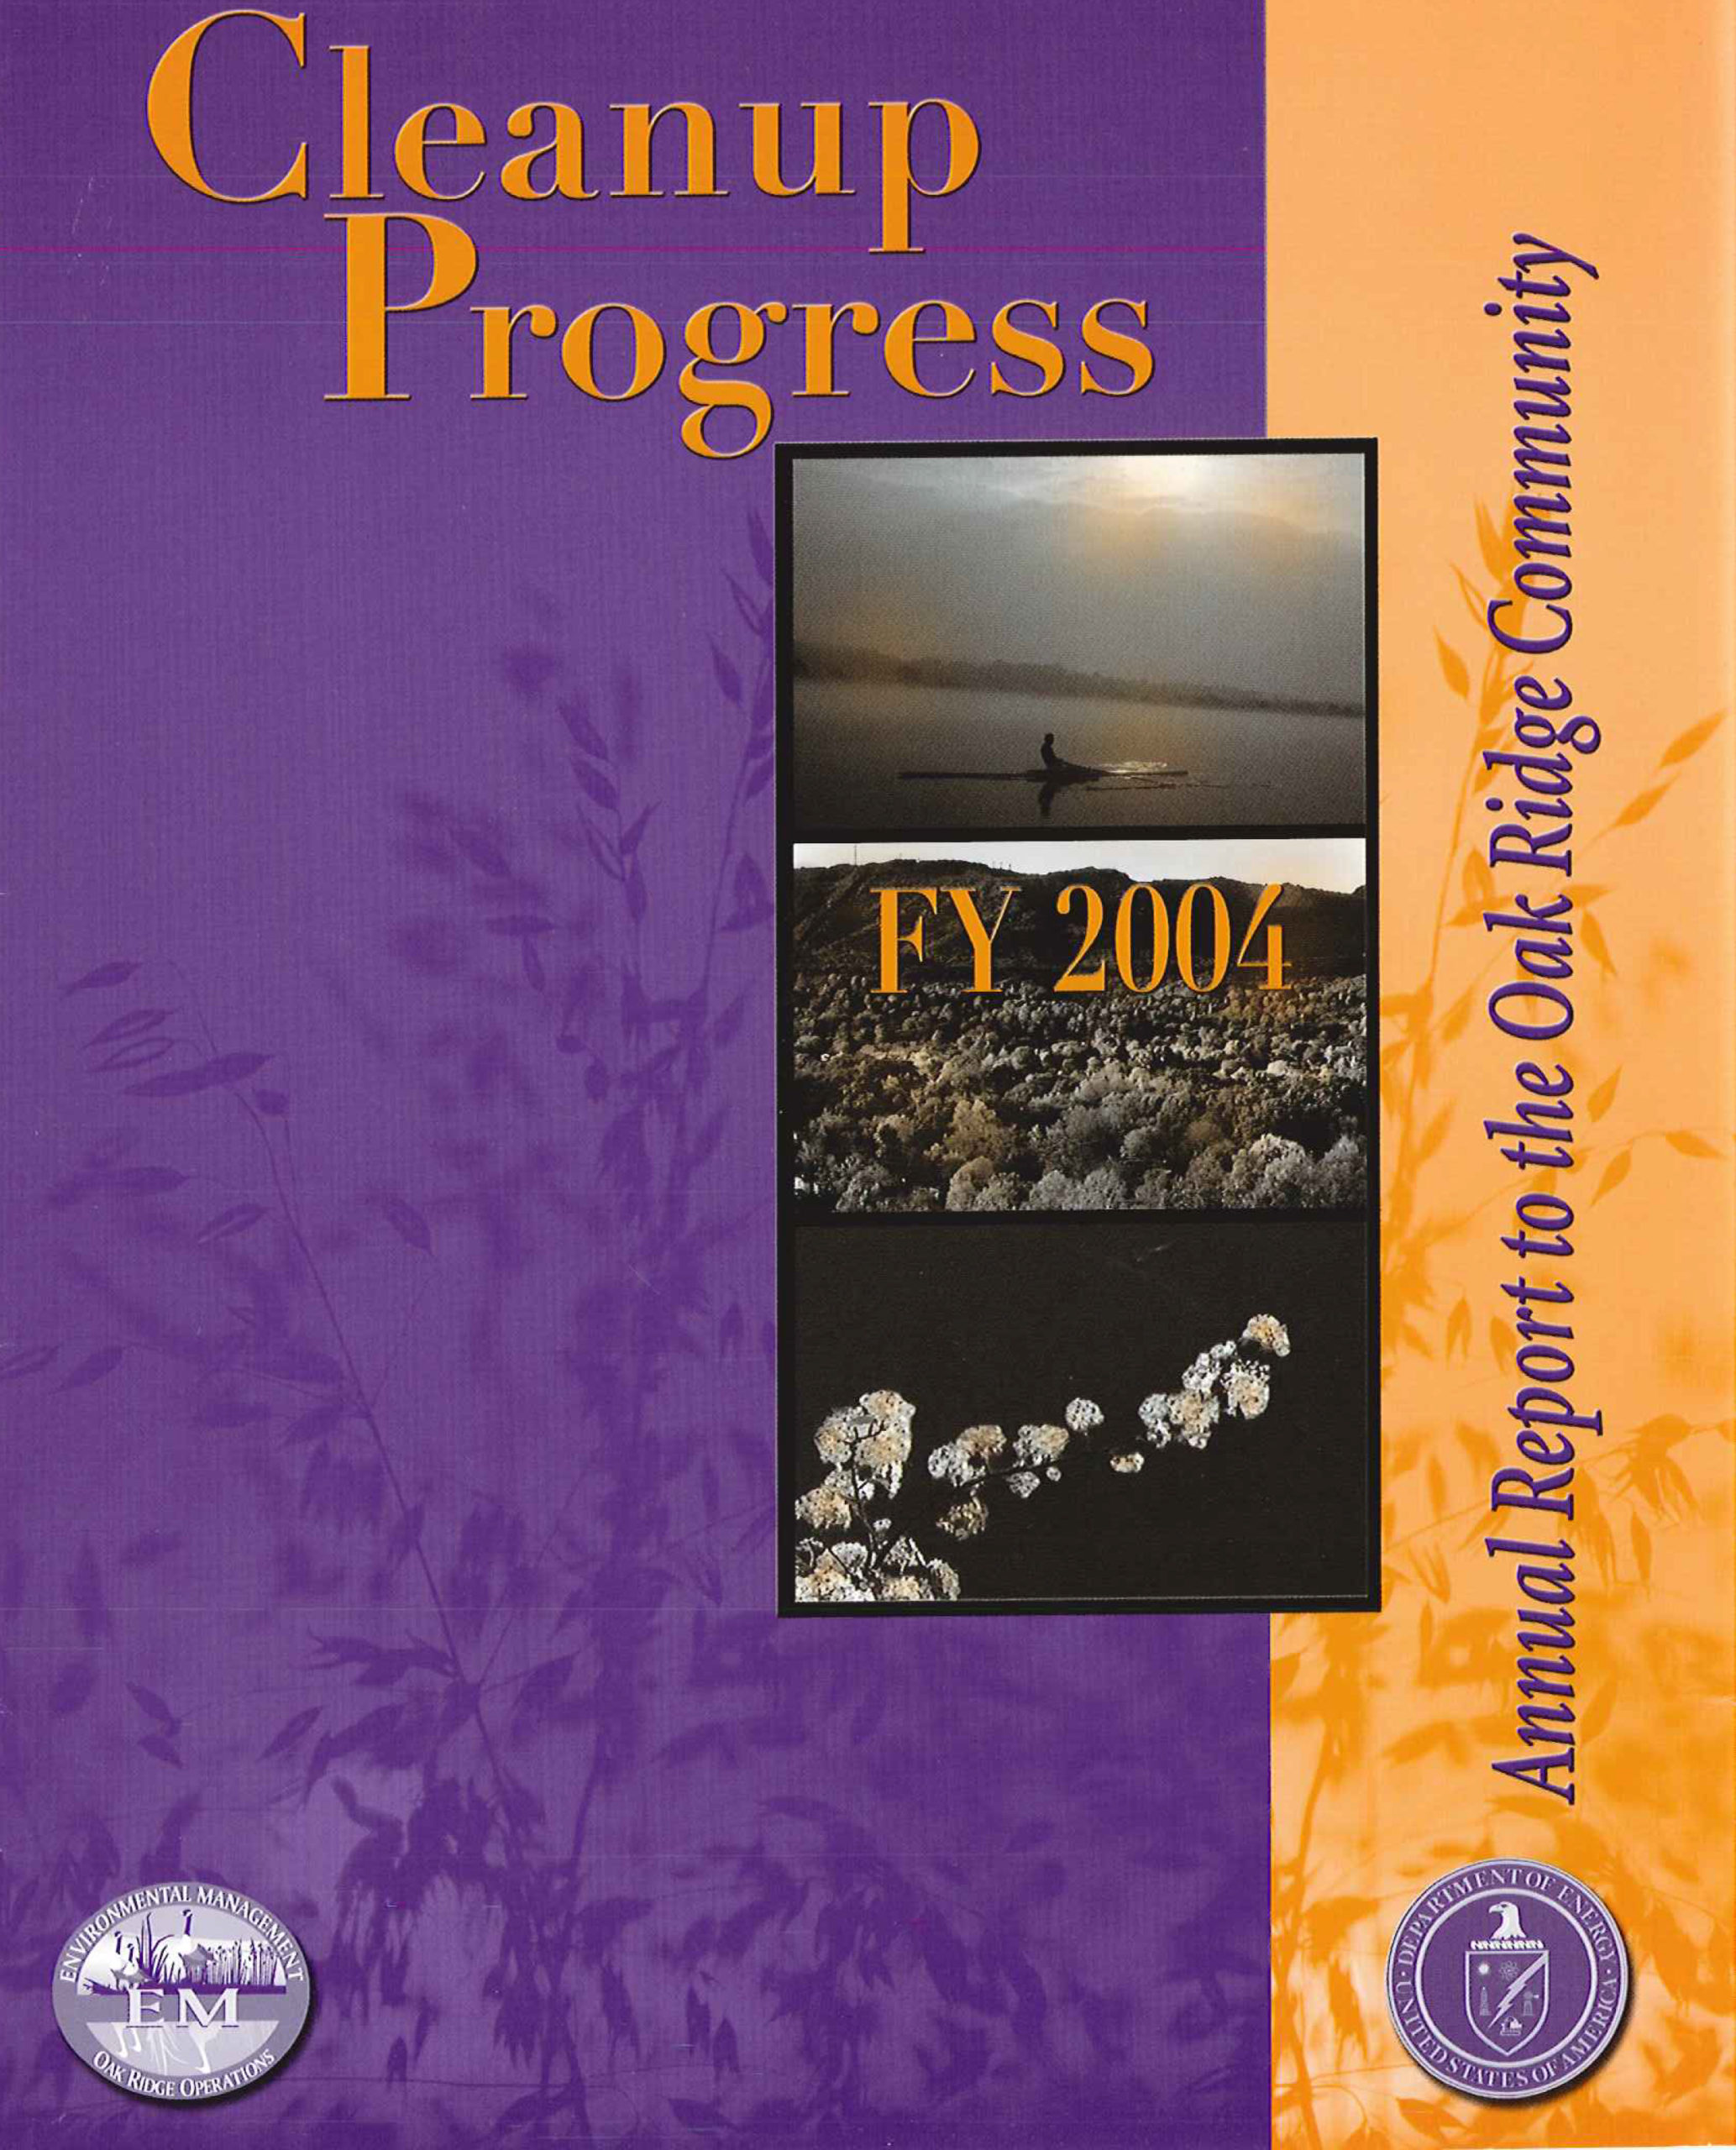 2004 Cleanup Progress cover